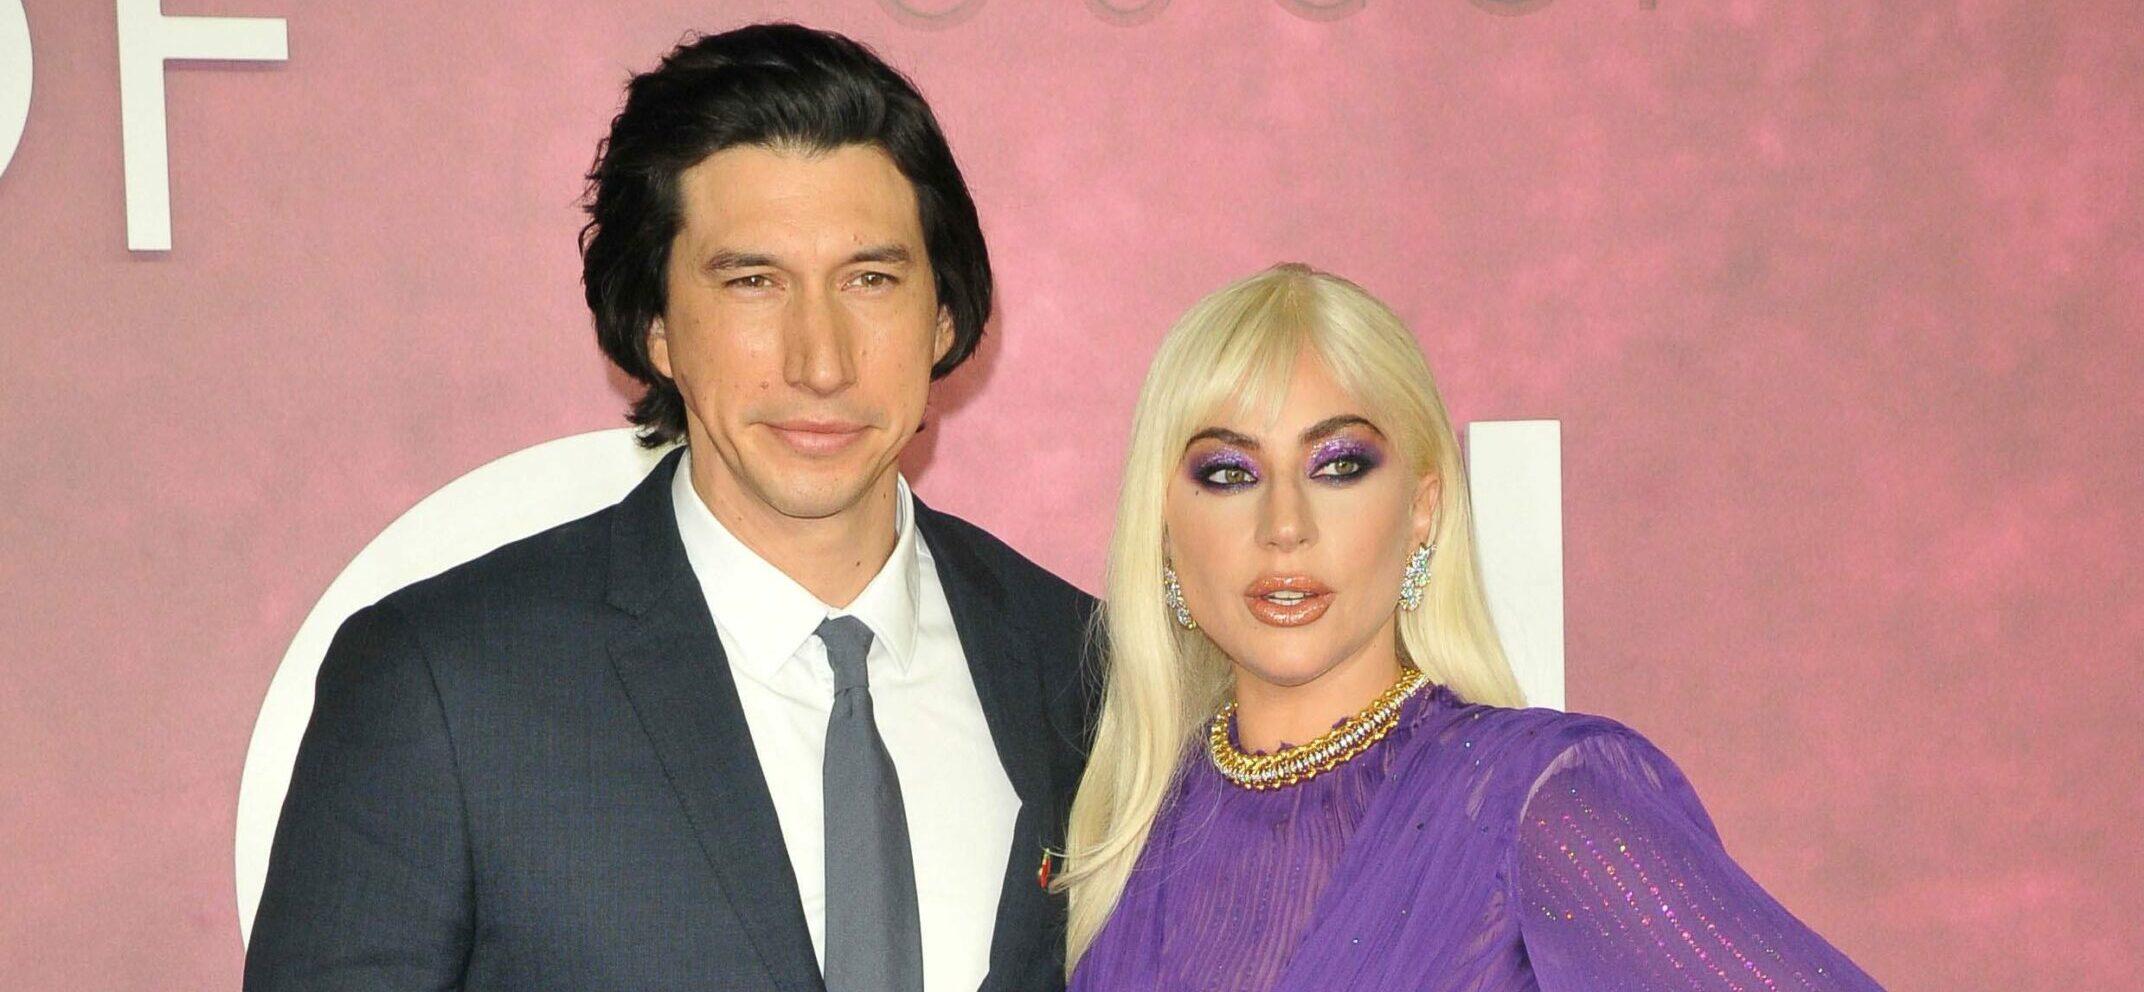 Adam Driver and Lady Gaga at the "House of Gucci" UK film premiere, Odeon Luxe Leicester Square, Leicester Square, on Tuesday 09 November 2021 in London, England, UK.